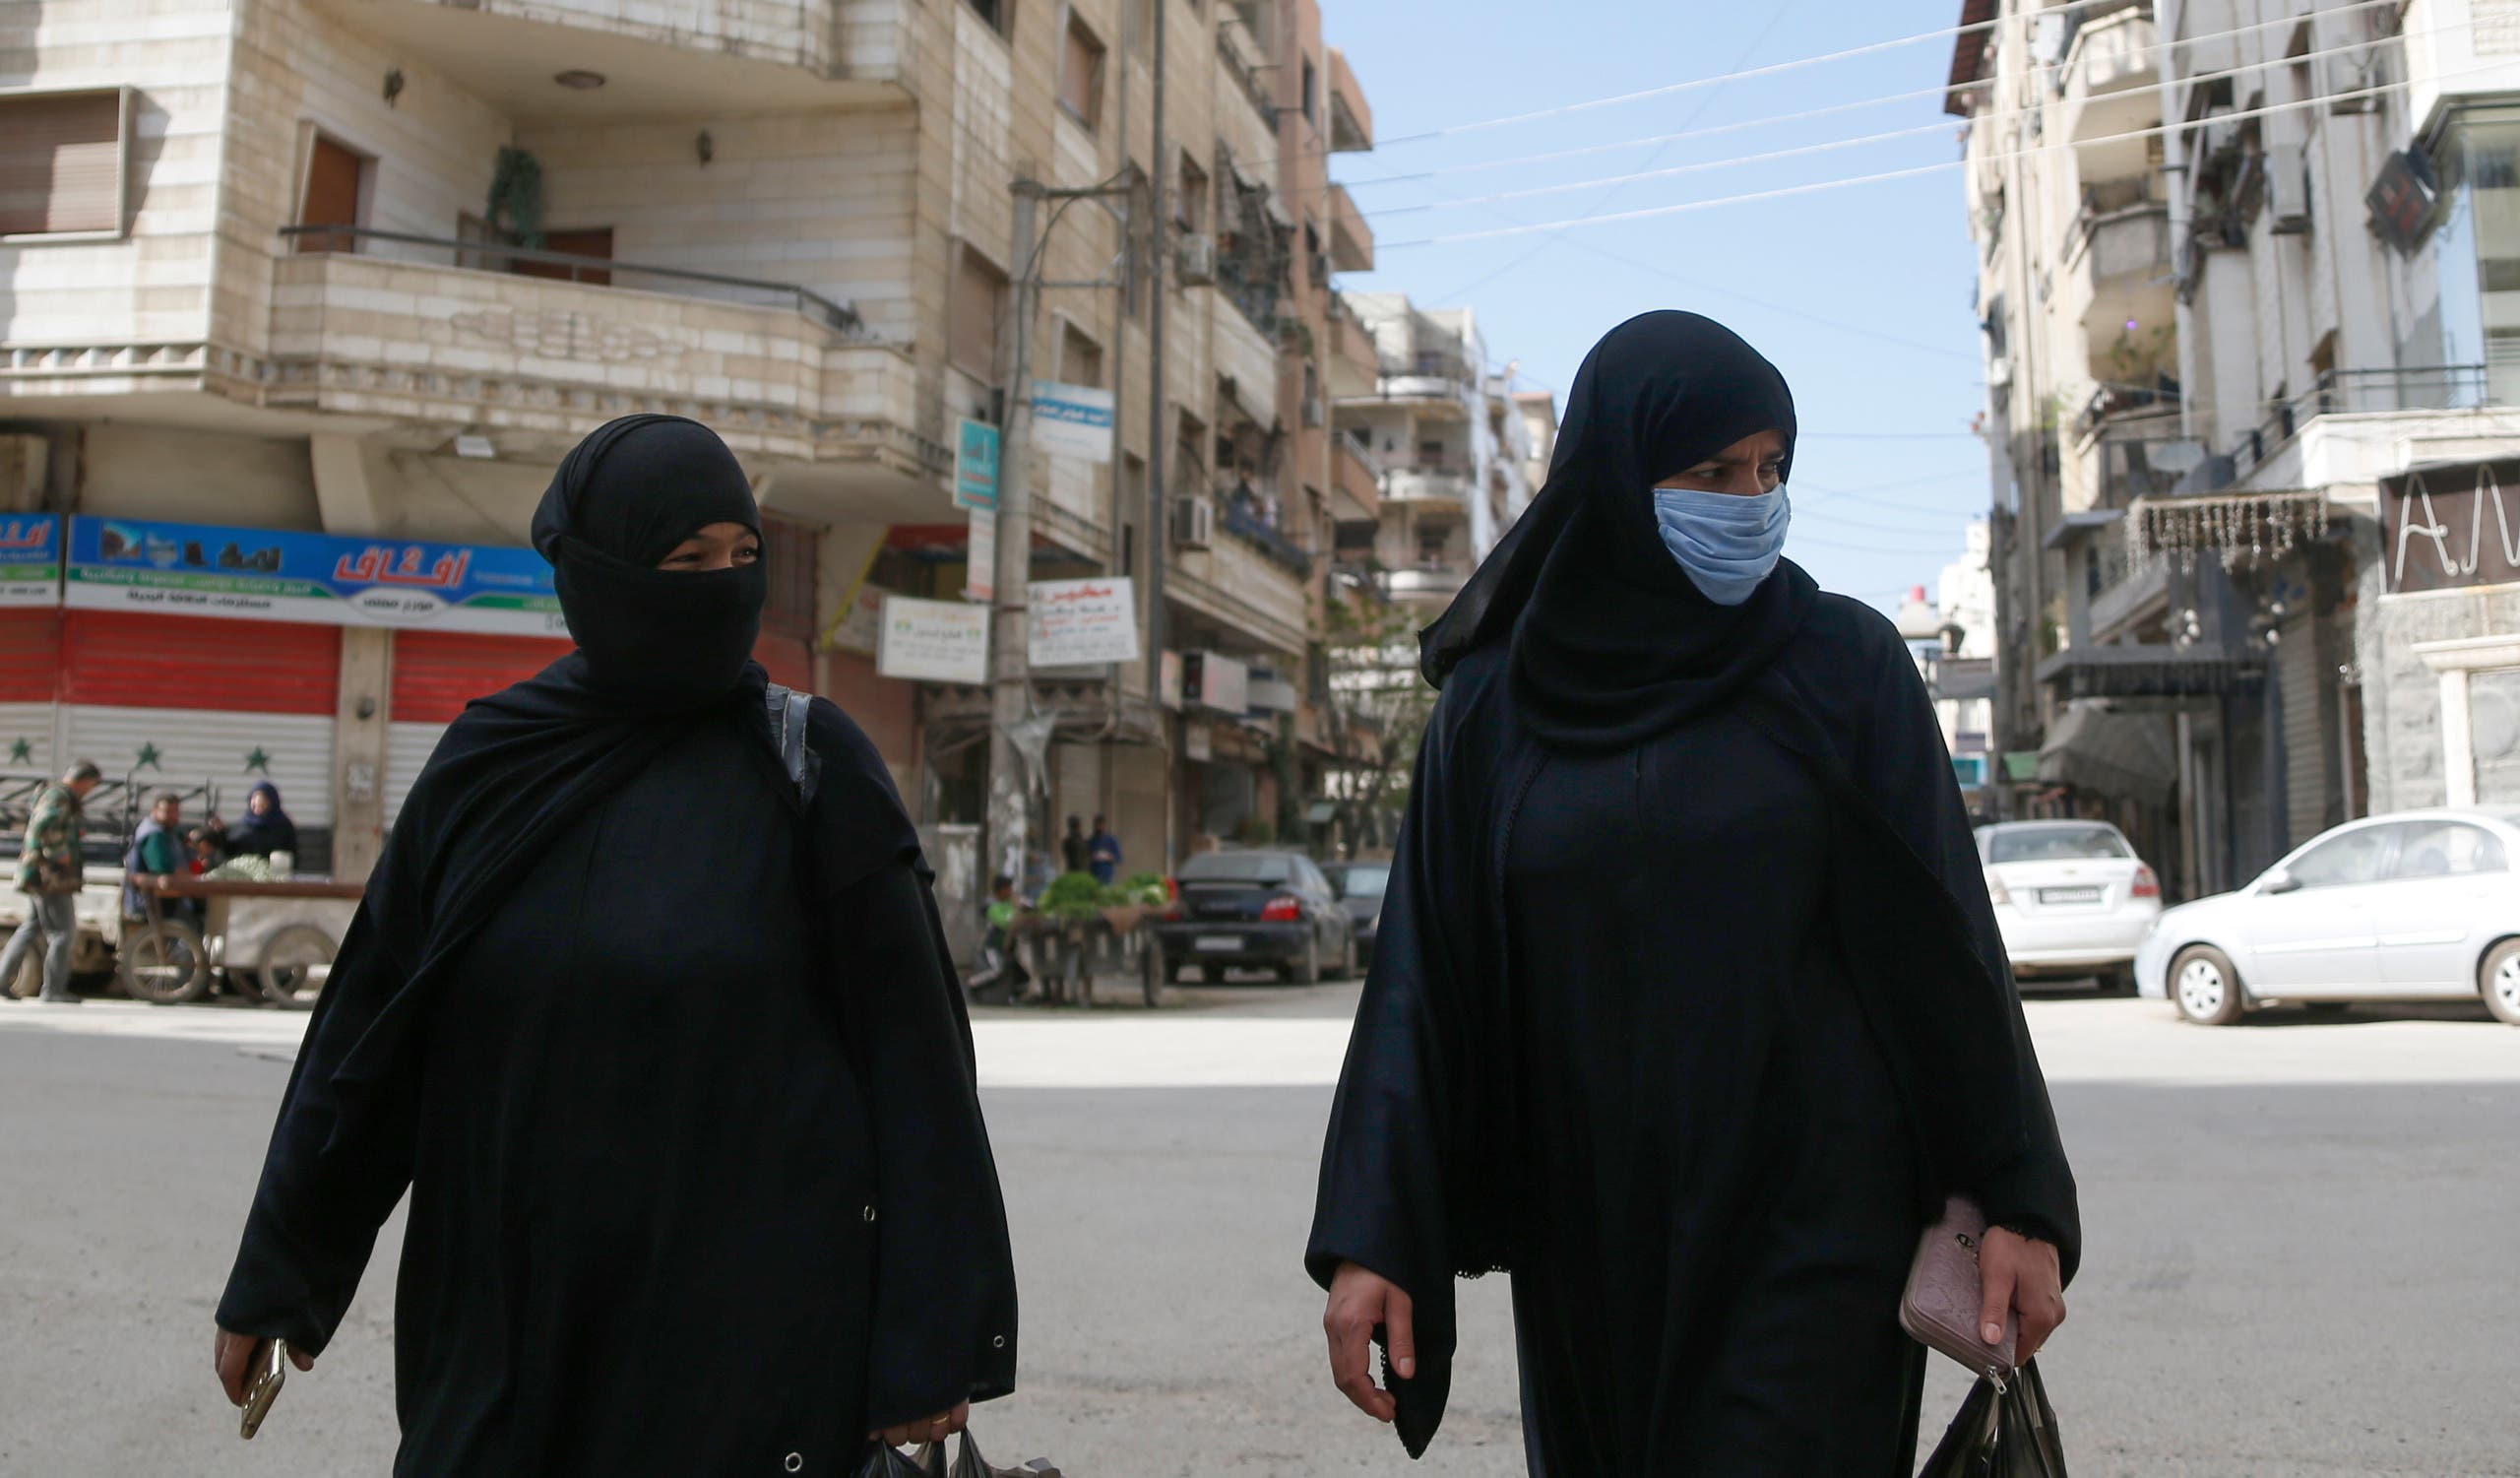 Syrian women, one of them wearing a face mask as a preventive measure against the novel coronavirus, walk along a street in the capital Damascus on April 1, 2020. (AP)